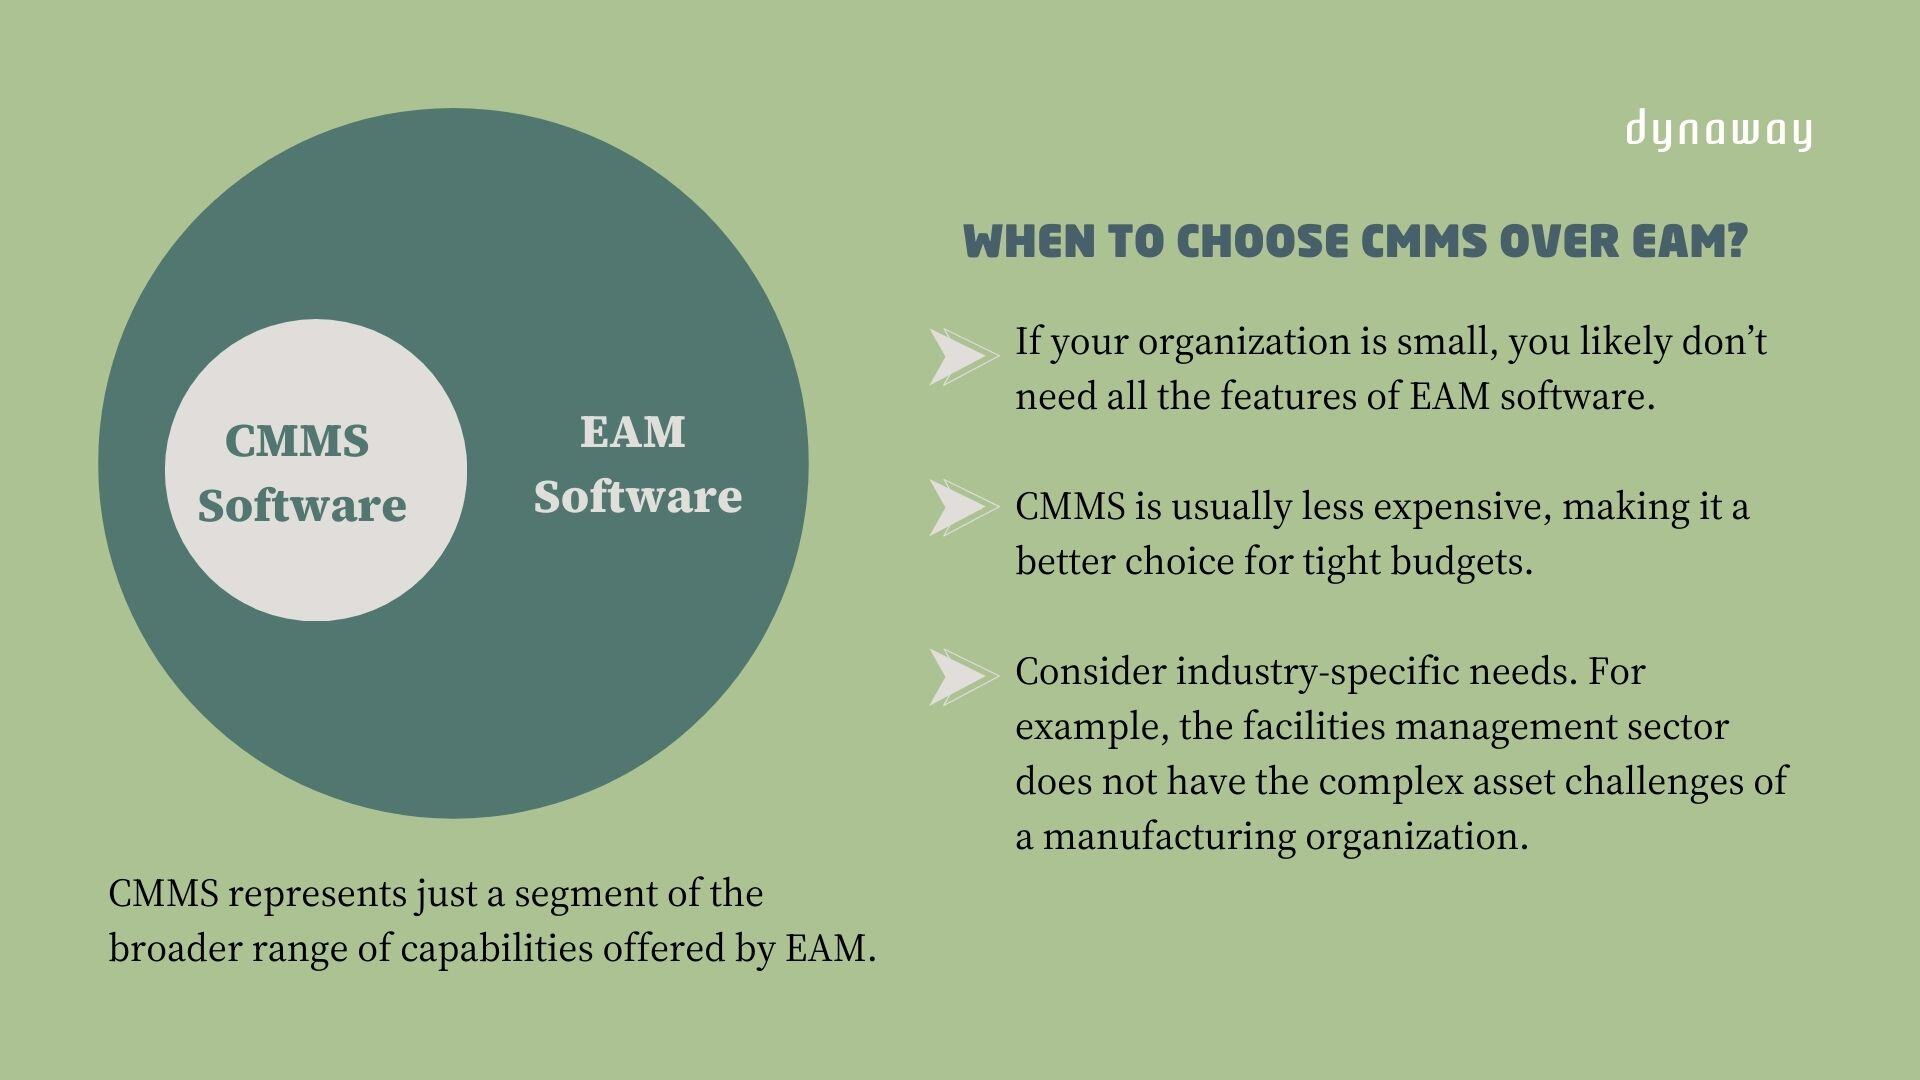 When to choose CMMS over EAM?